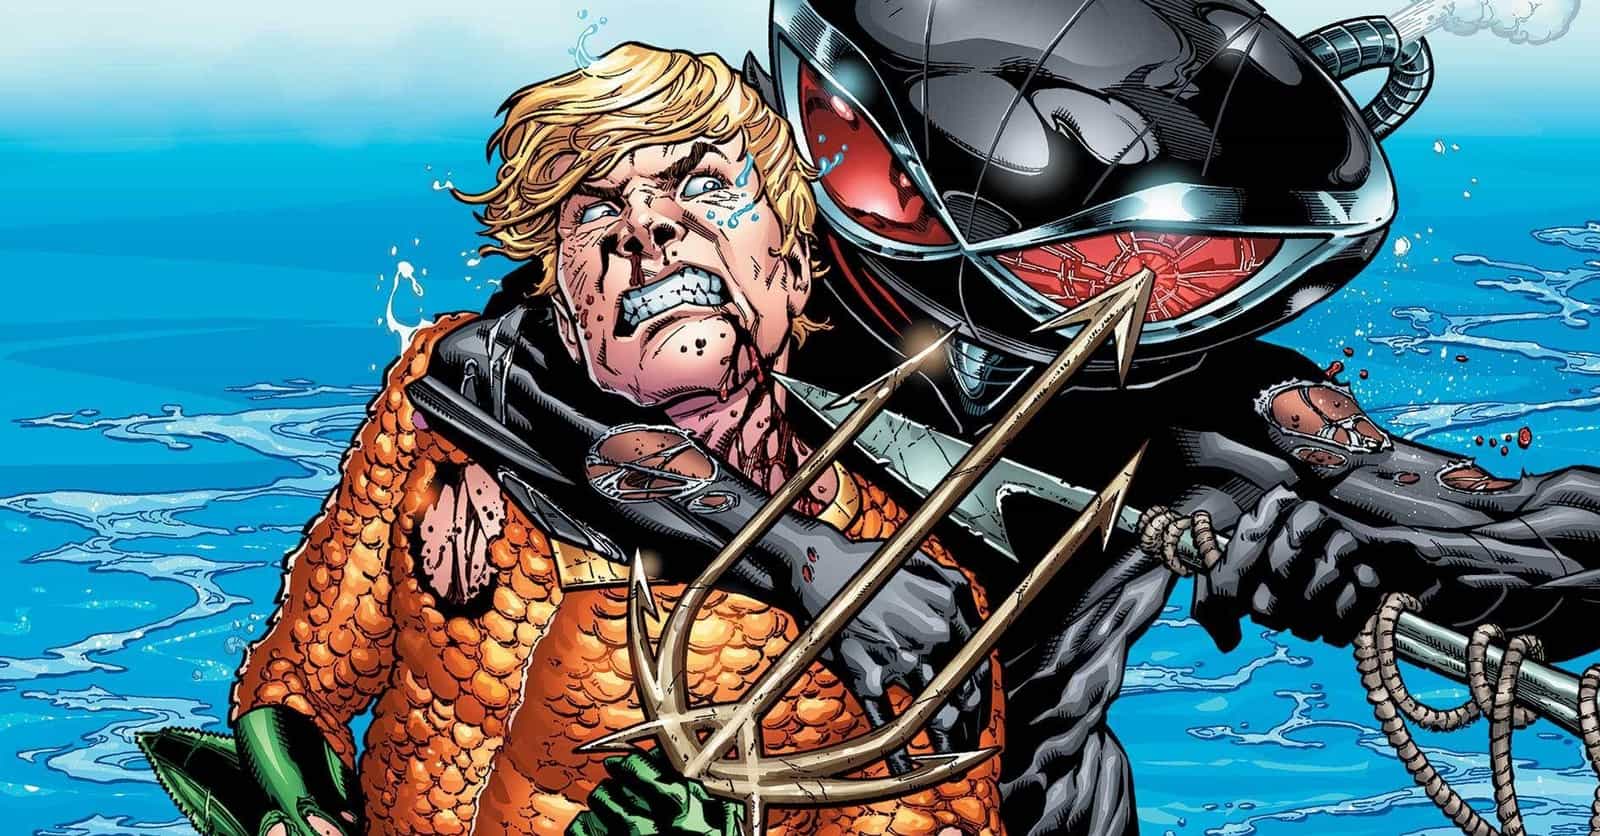 'Aquaman' Moments You Definitely Won't See In The Movie